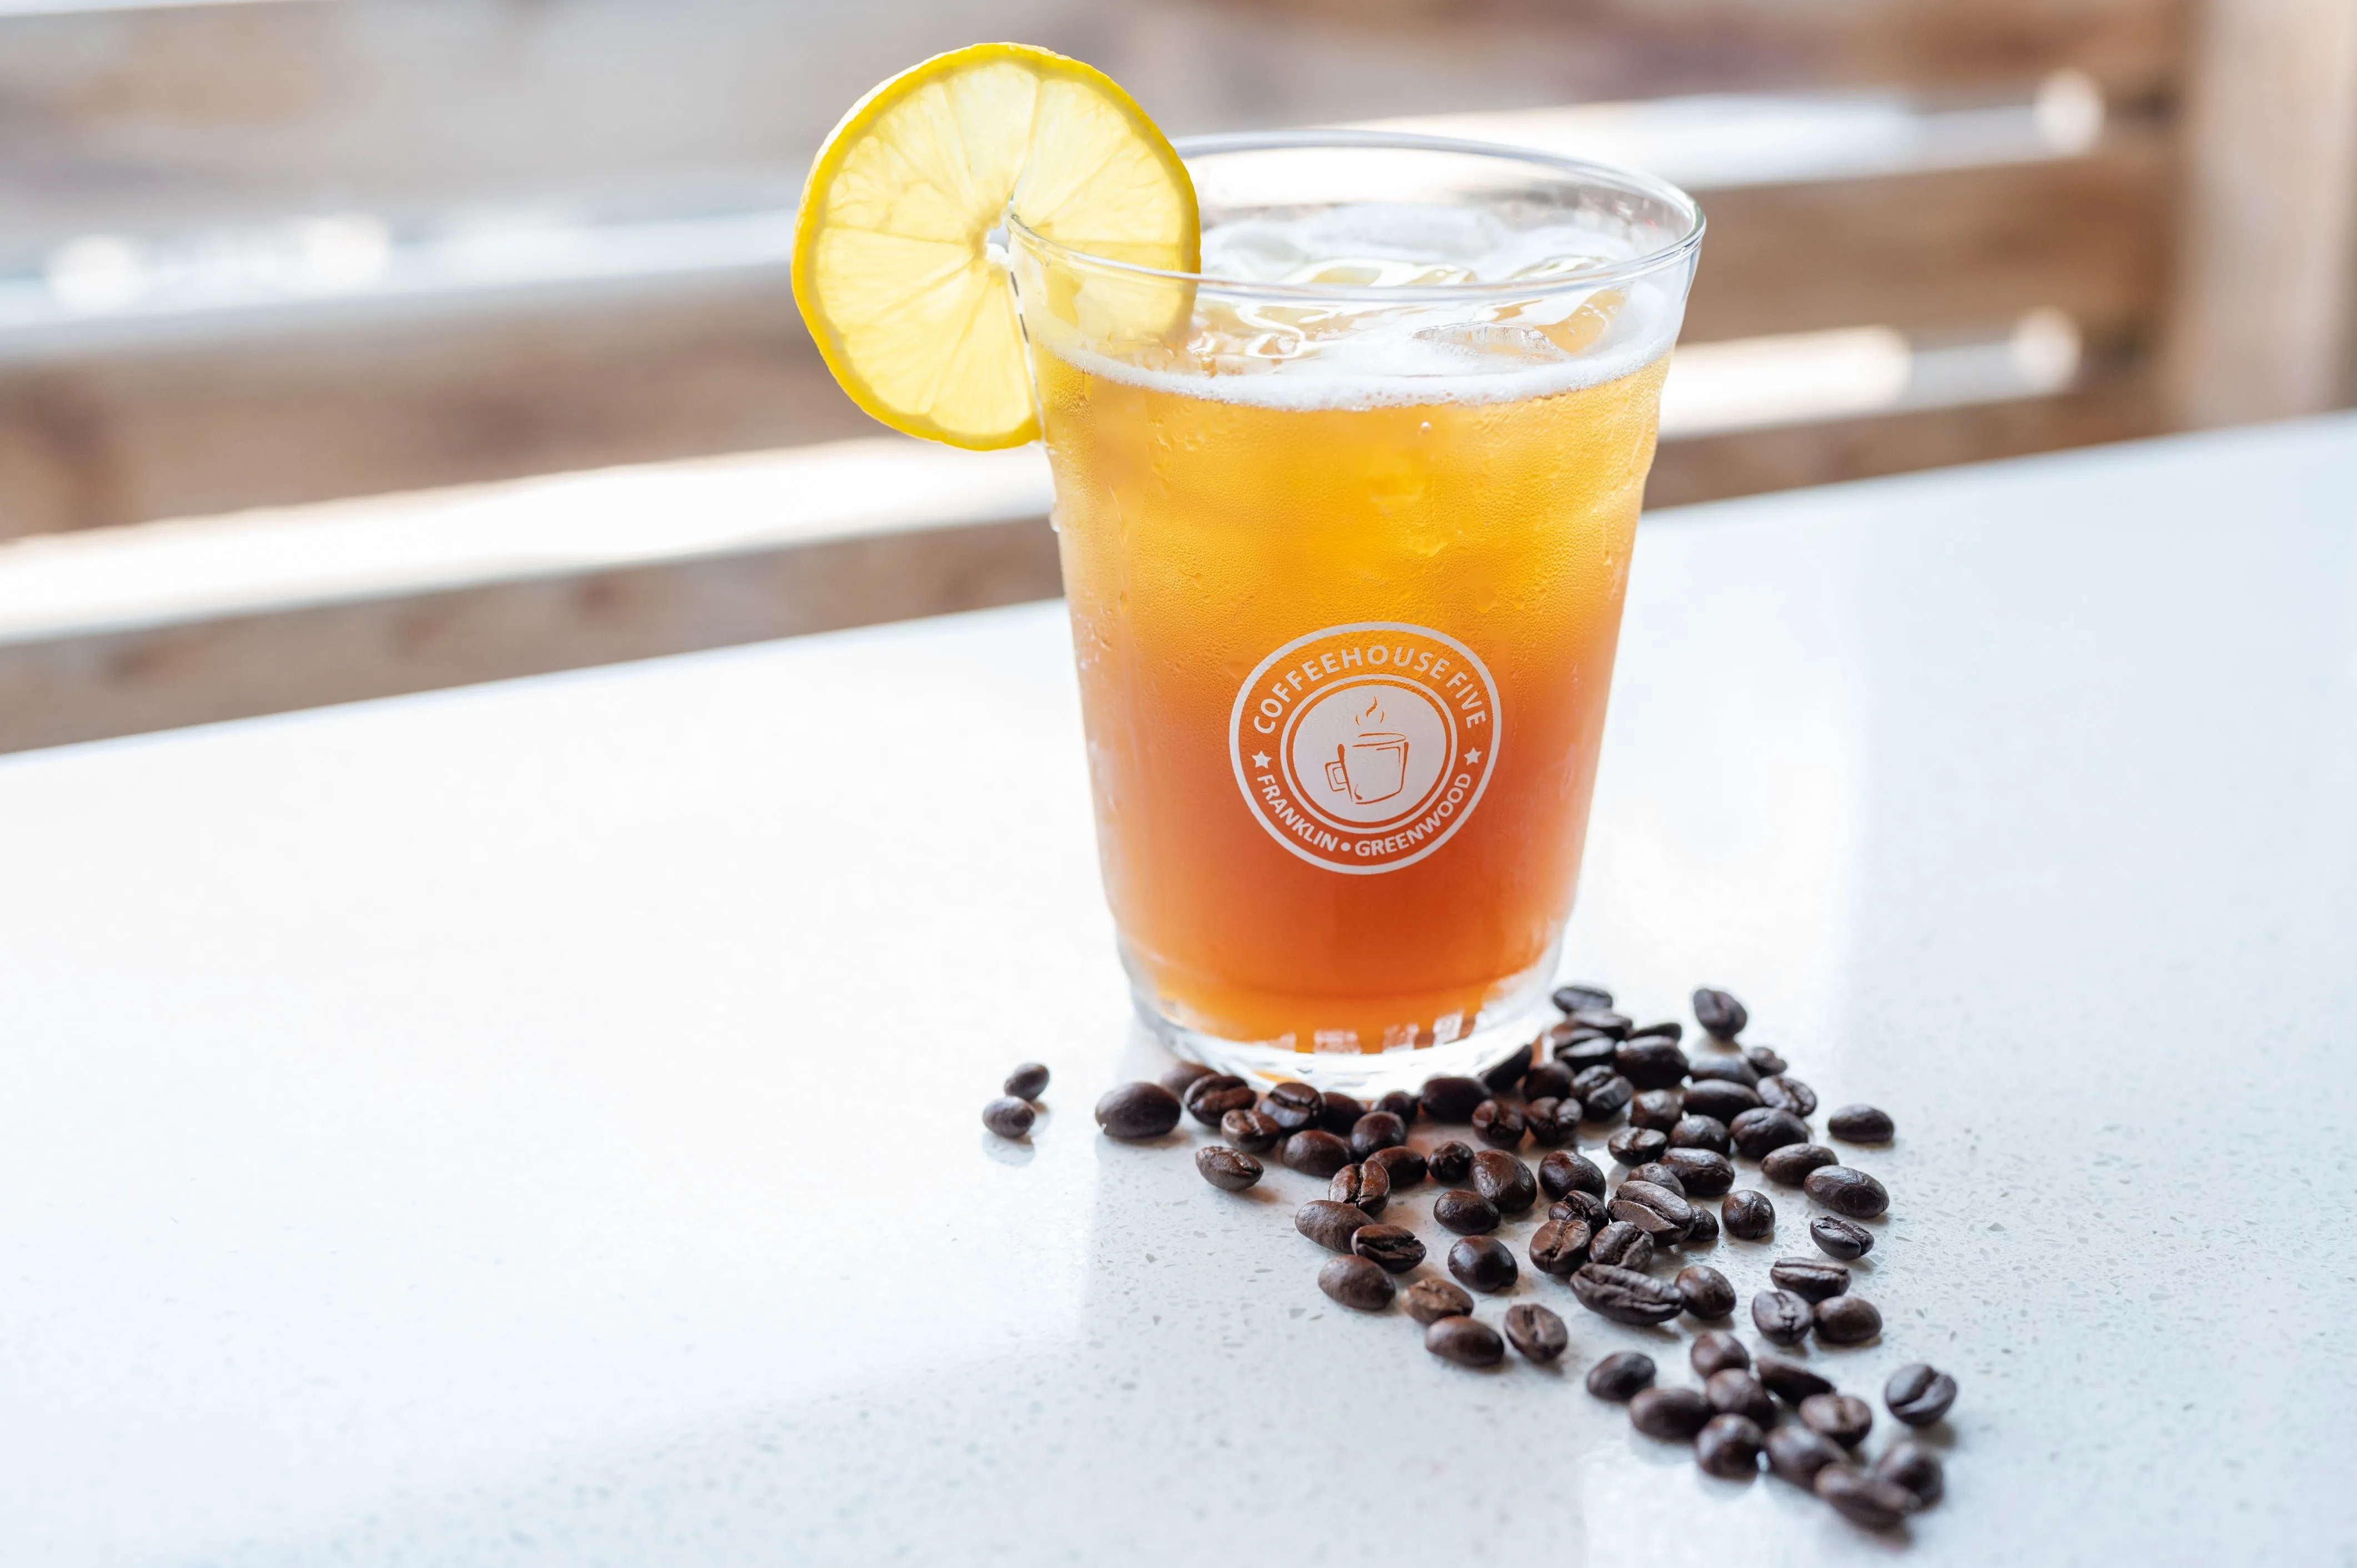 Iced coffee in a branded glass garnished with a lemon slice, surrounded by coffee beans on a table.